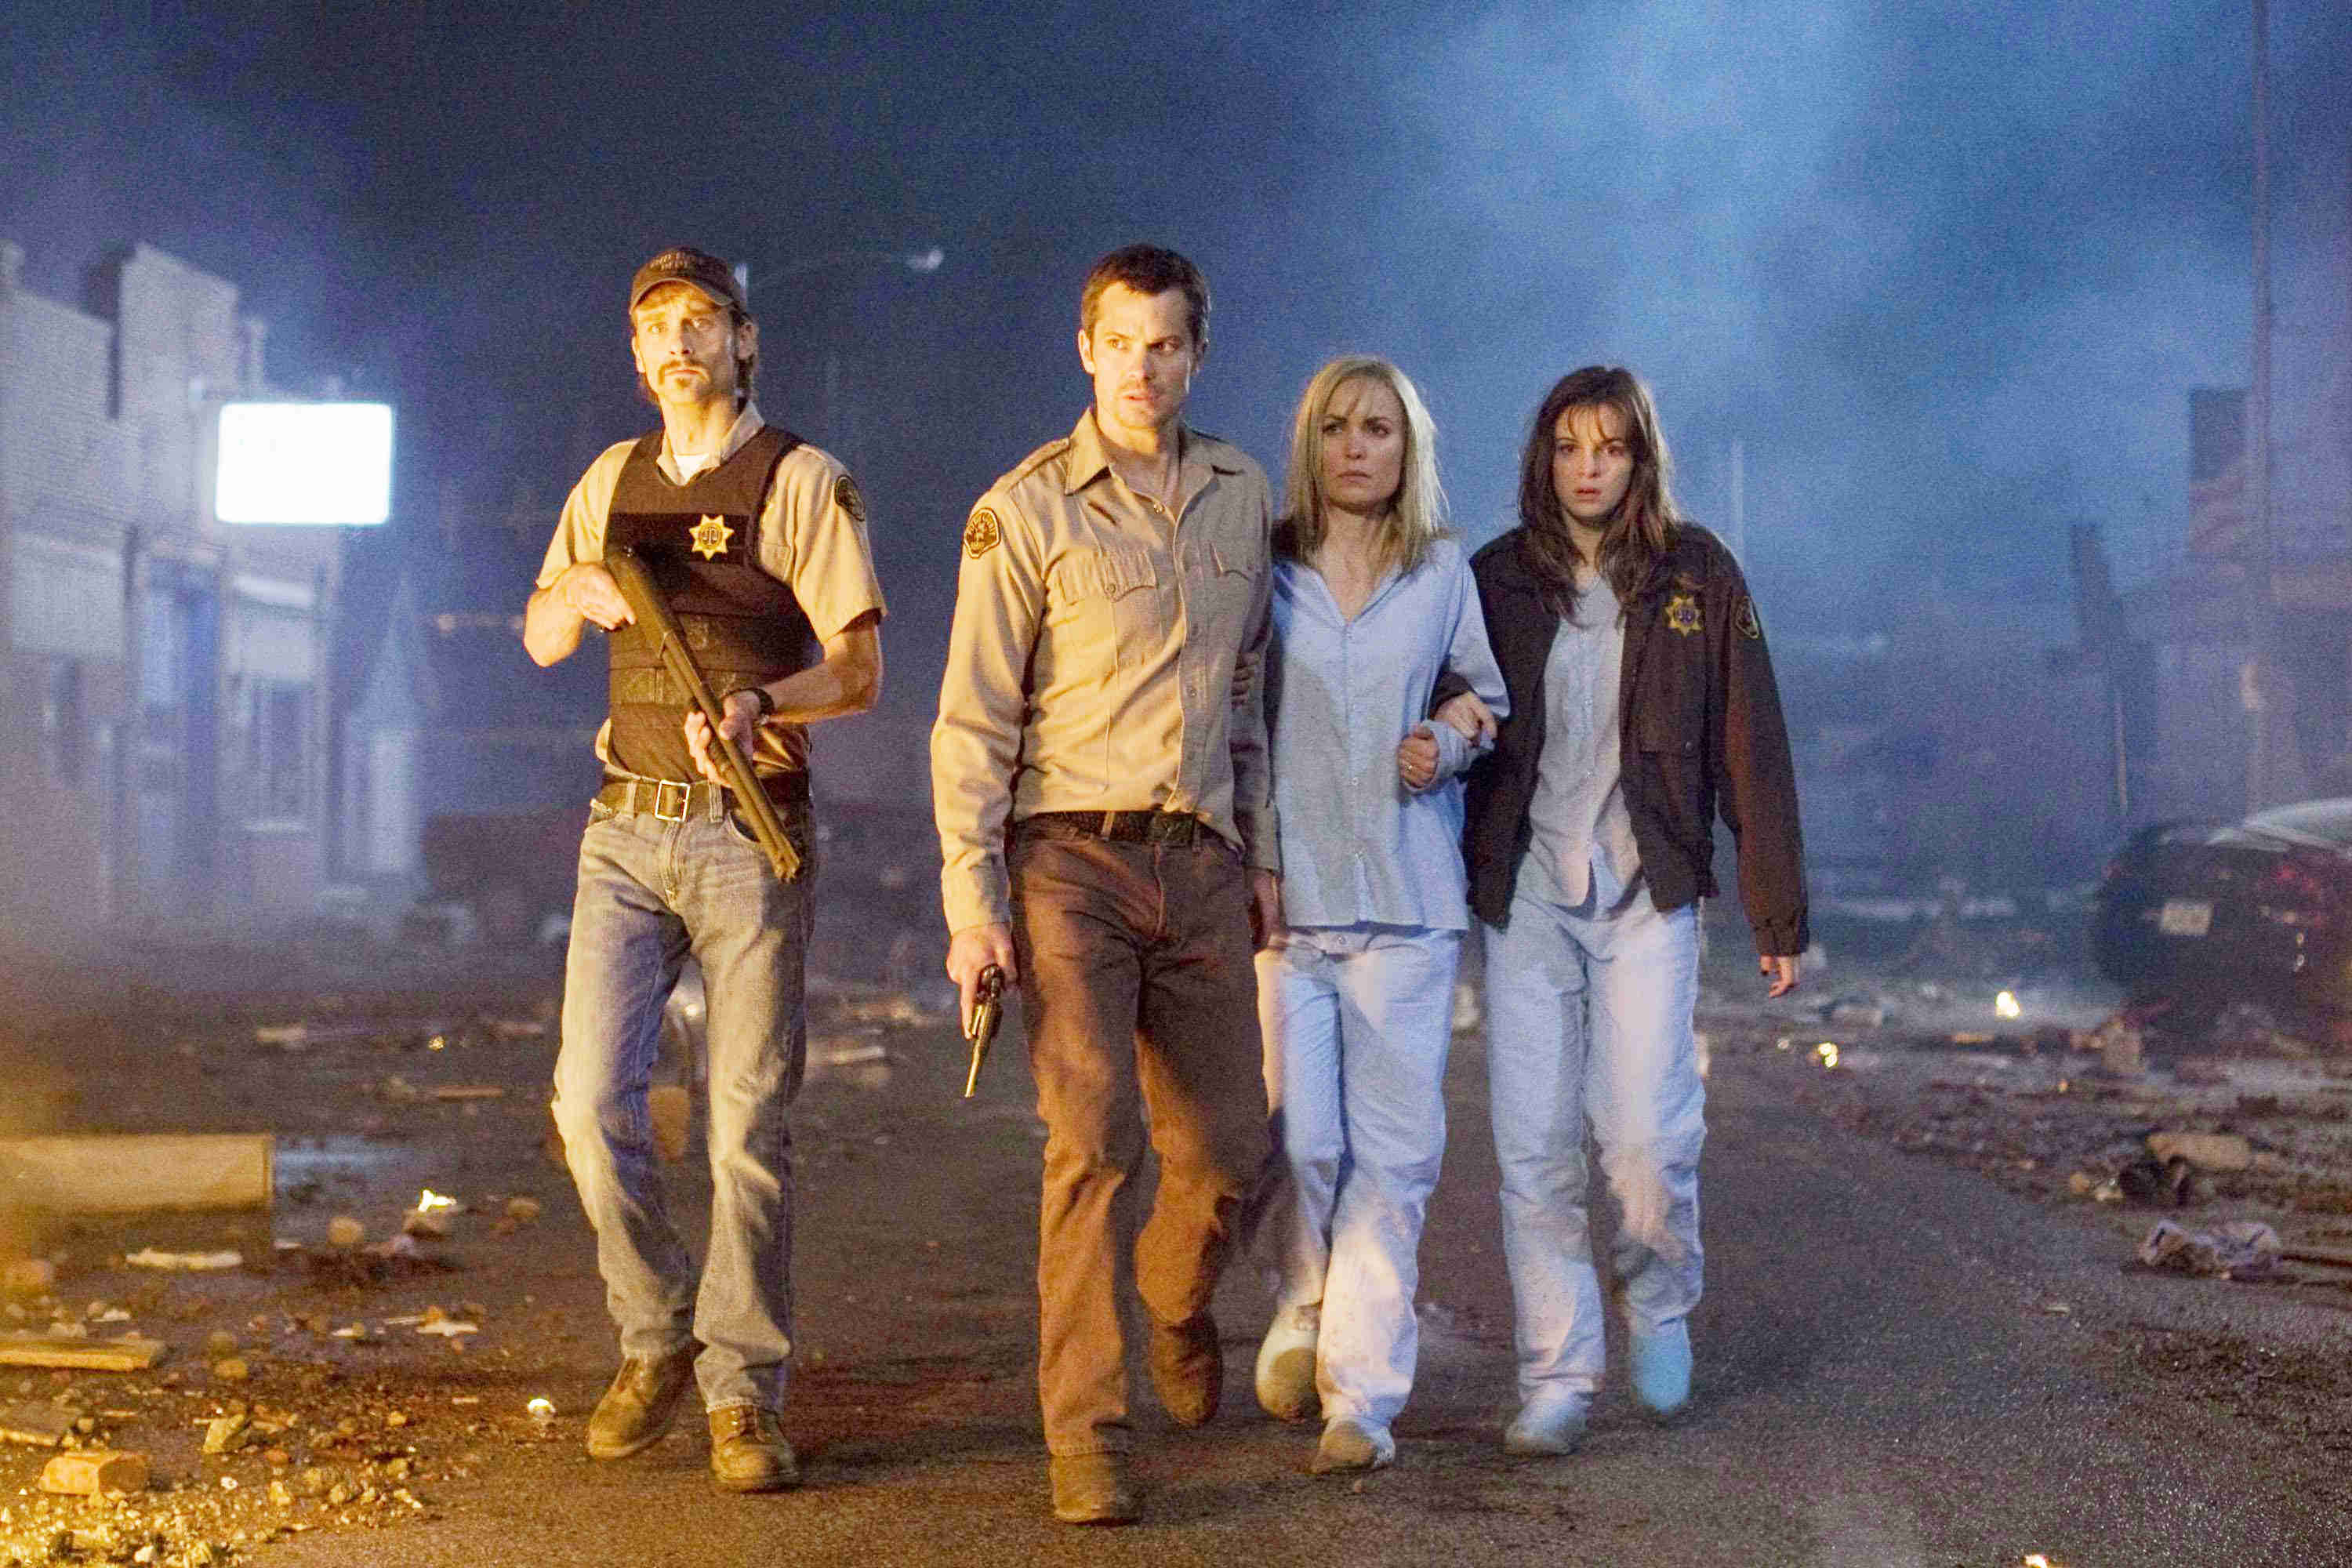 Joe Anderson, Timothy Olyphant, Radha Mitchell and Danielle Panabaker in Overture Films' The Crazies (2010)